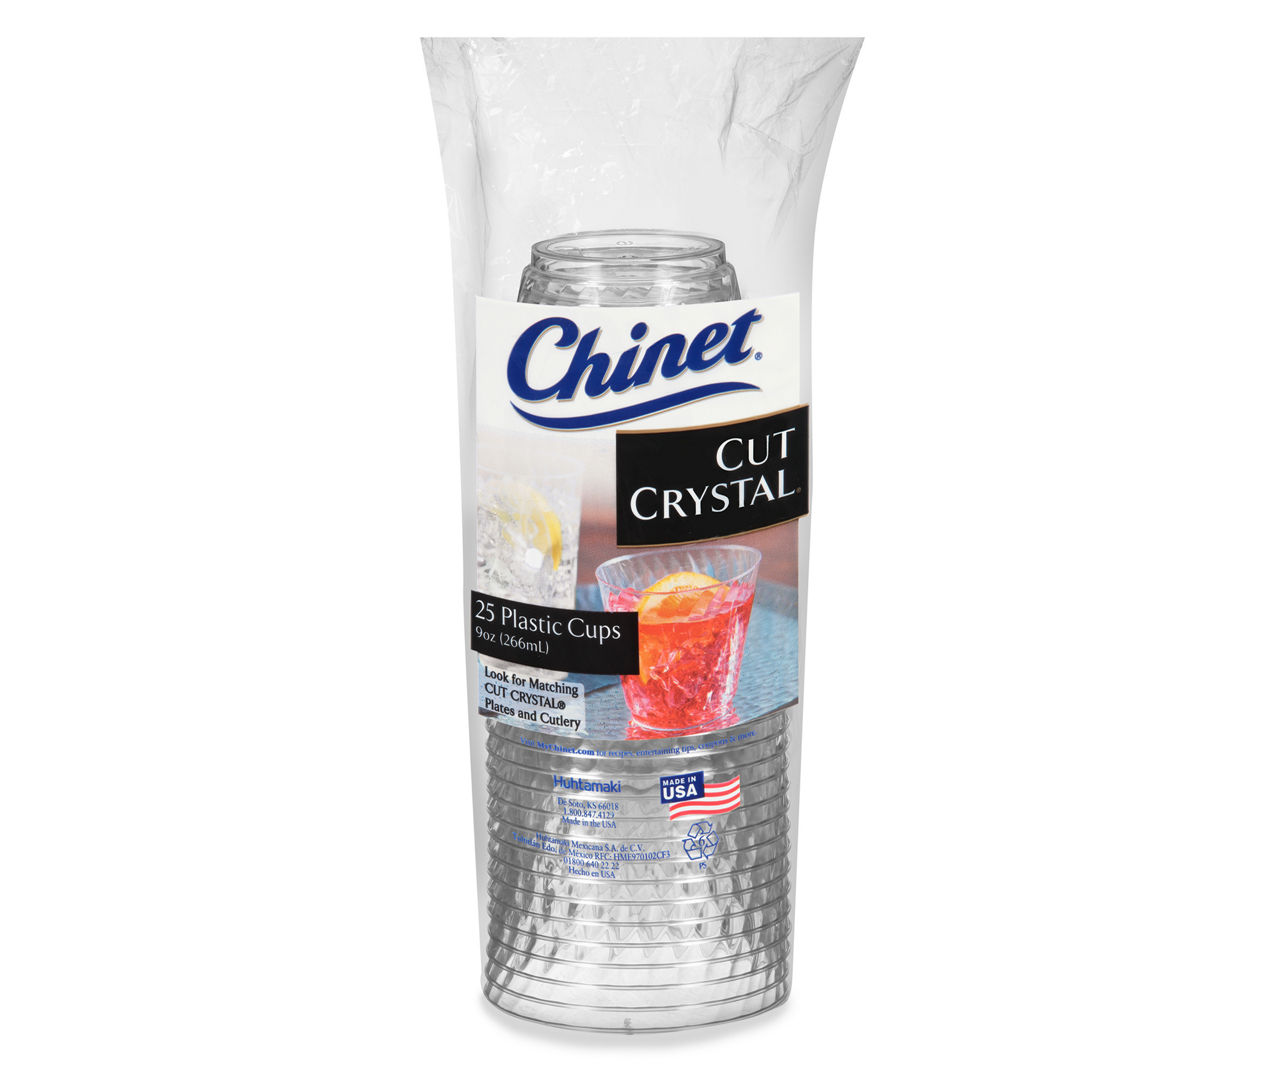 Chinet 9-Oz. Crystal Cups, 100 ct. - Clear 